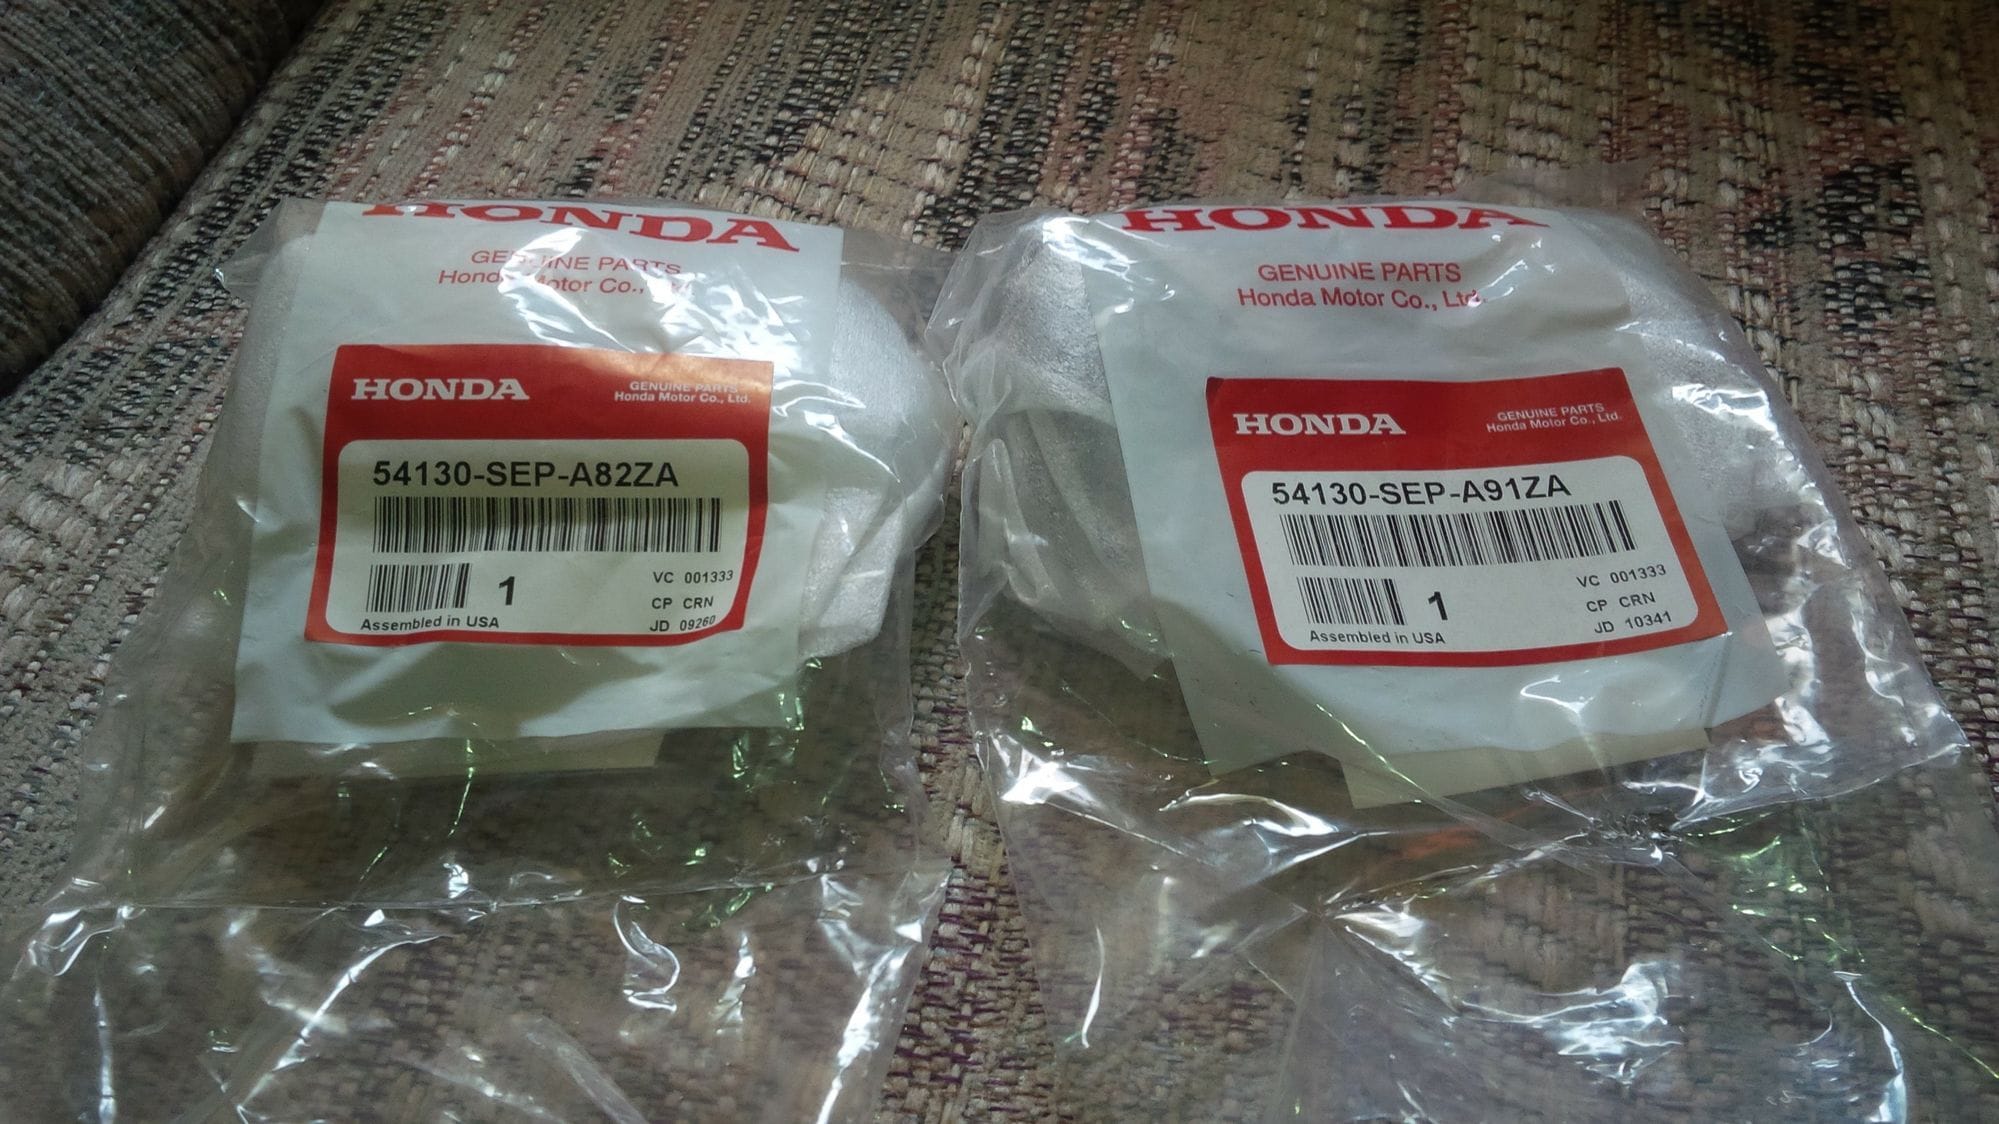 2008 Acura TL - CLOSED: New in the package OEM Acura TL and TL-s AUTO shift knobs - Rossville, GA 30741, United States